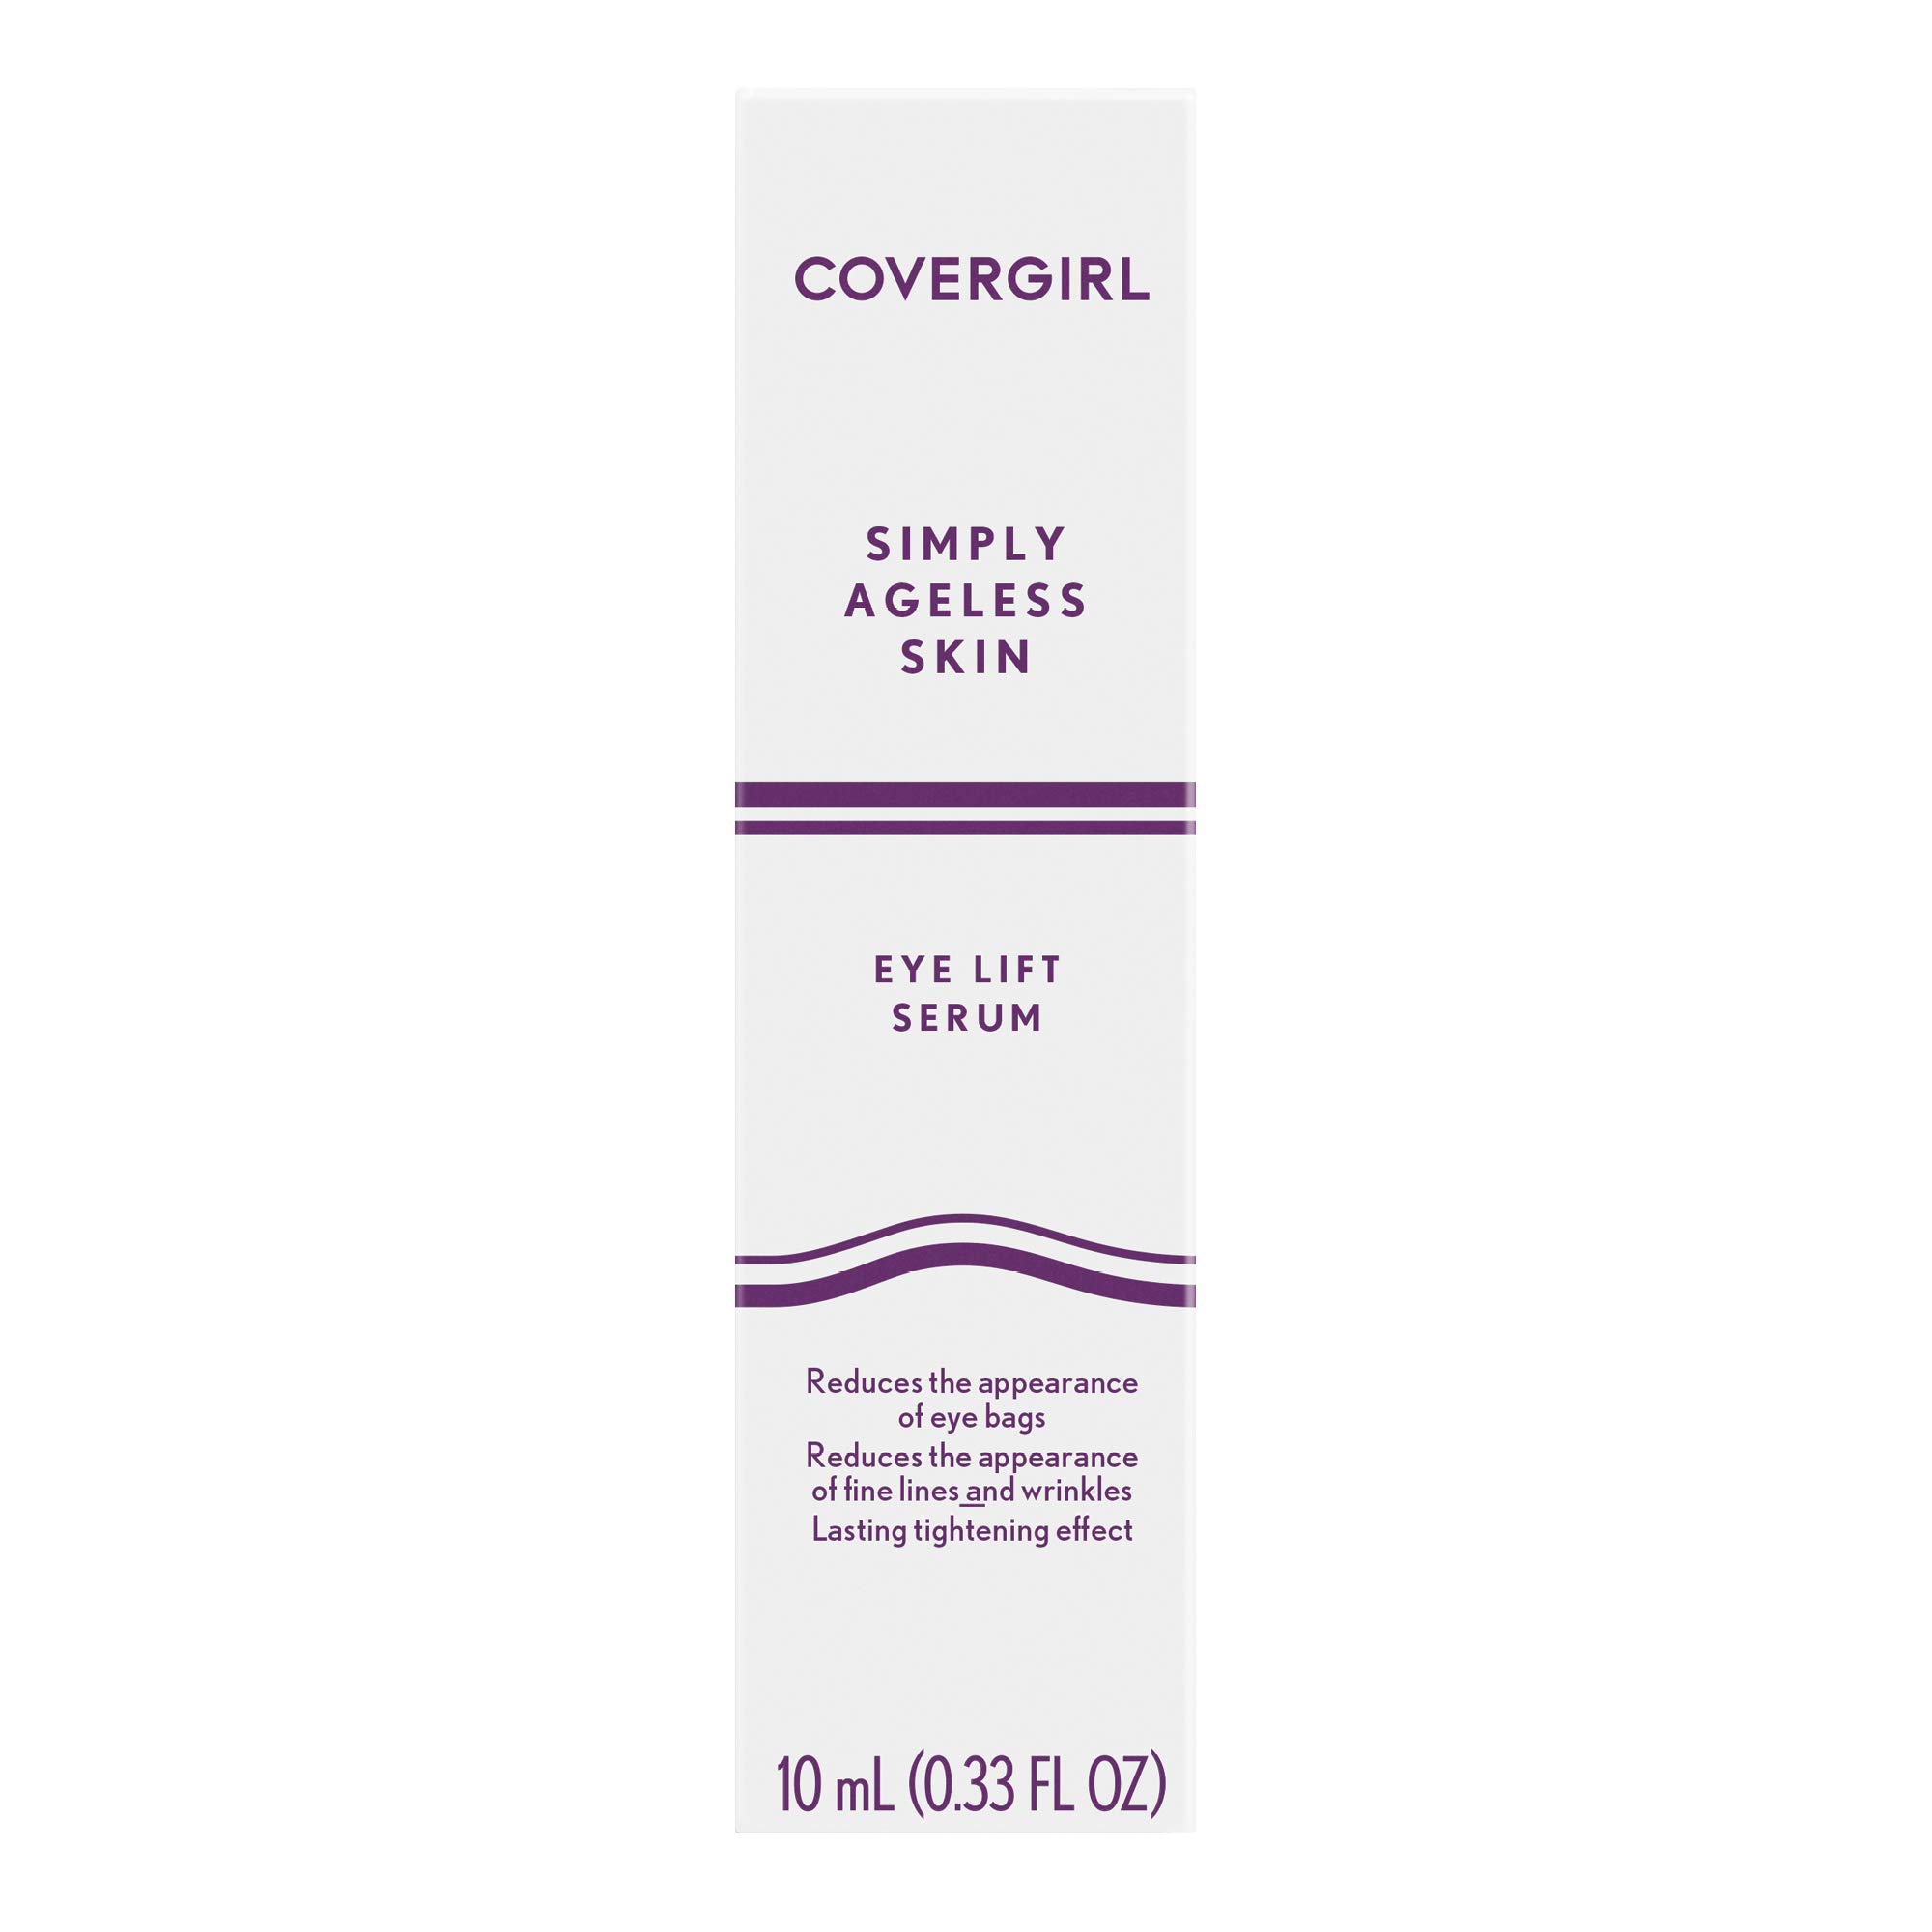 COVERGIRL Simply Ageless Skin Eye Lift Serum, Reduces Wrinkles, 1 Pack, 0.92 Oz ,Serum, Face Serum, Skin Tightening Serum, Anti-Wrinkle Serum, Tighter Skin, Instantly Youthful, Works Well With Makeup